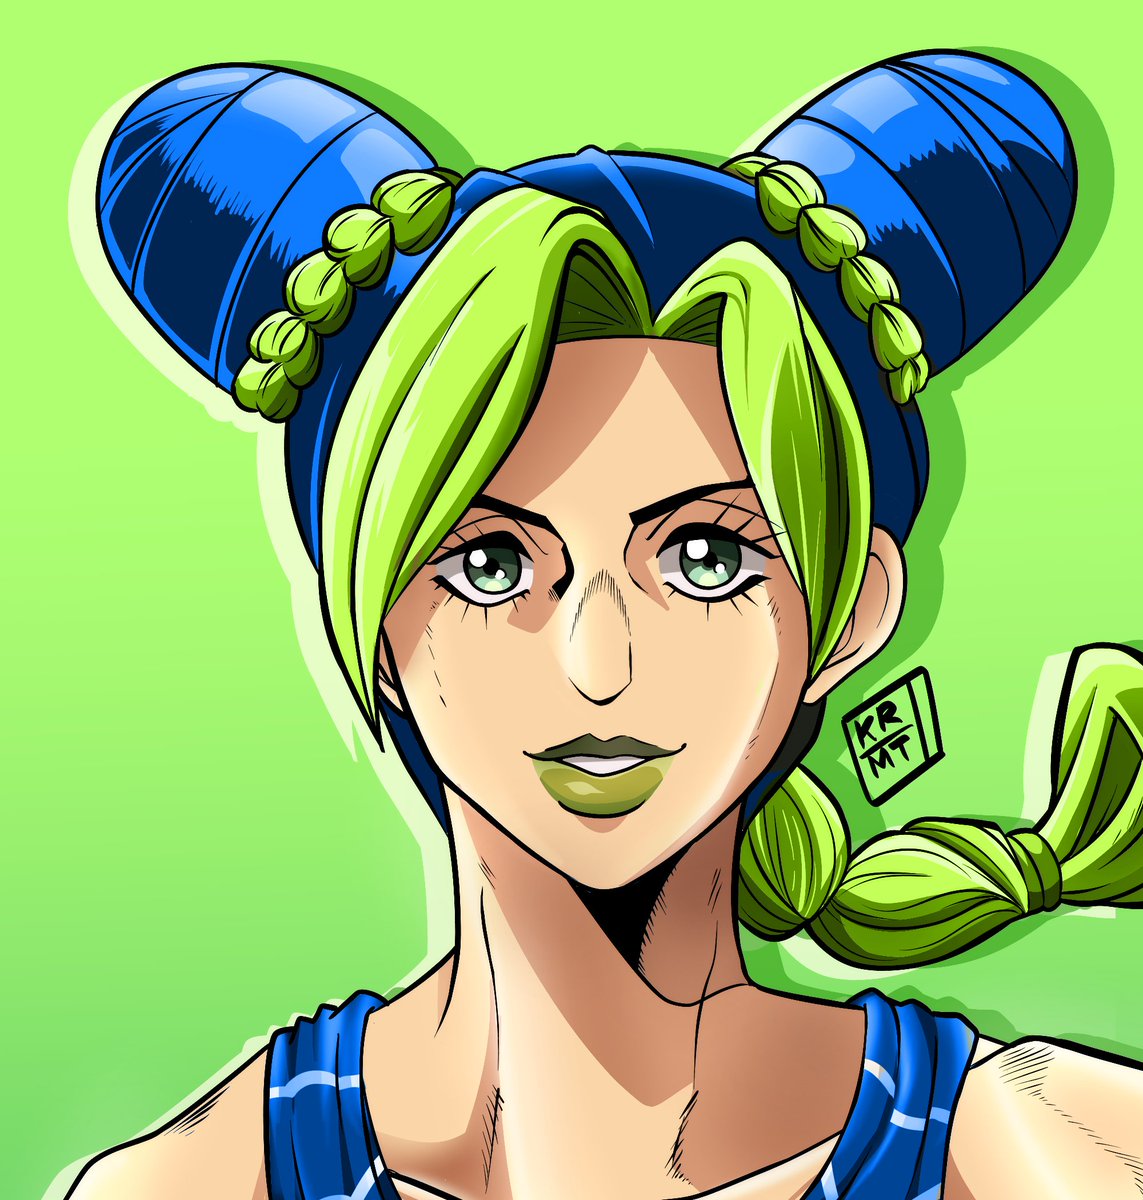 Jolyne in the anime style + Manga colors. 